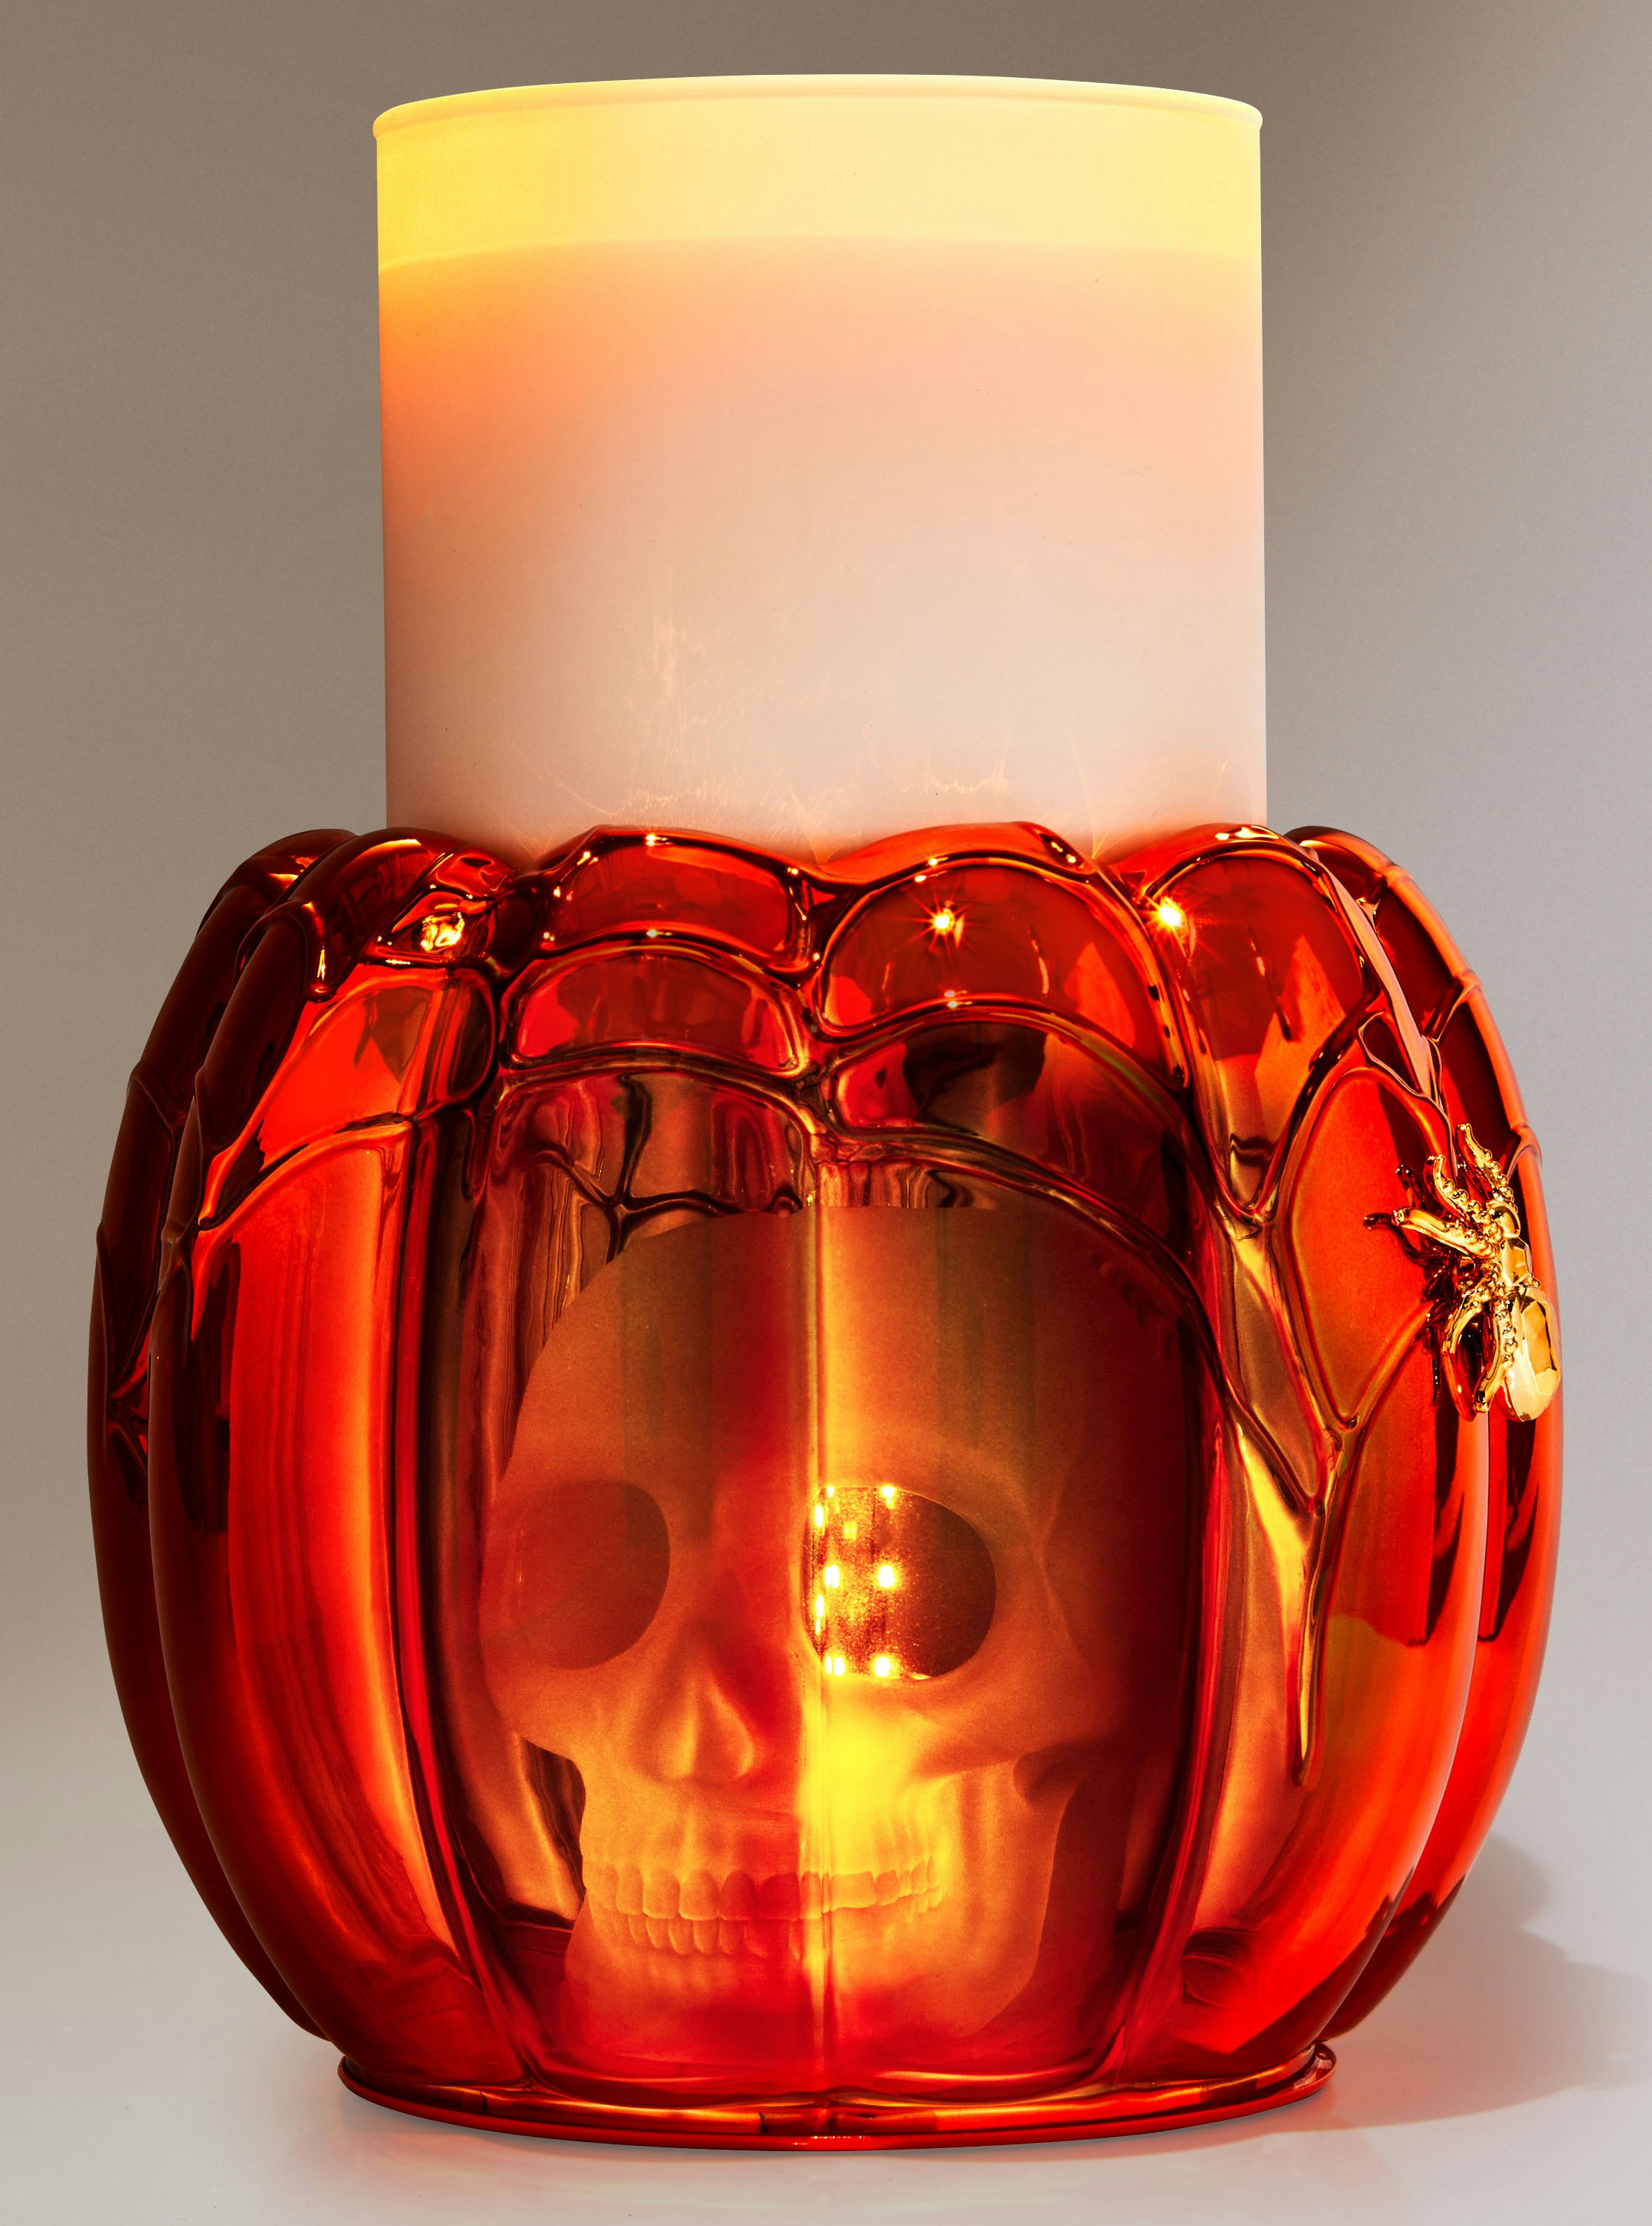 Bath & Body Works' Halloween Collection Is Coming July 24